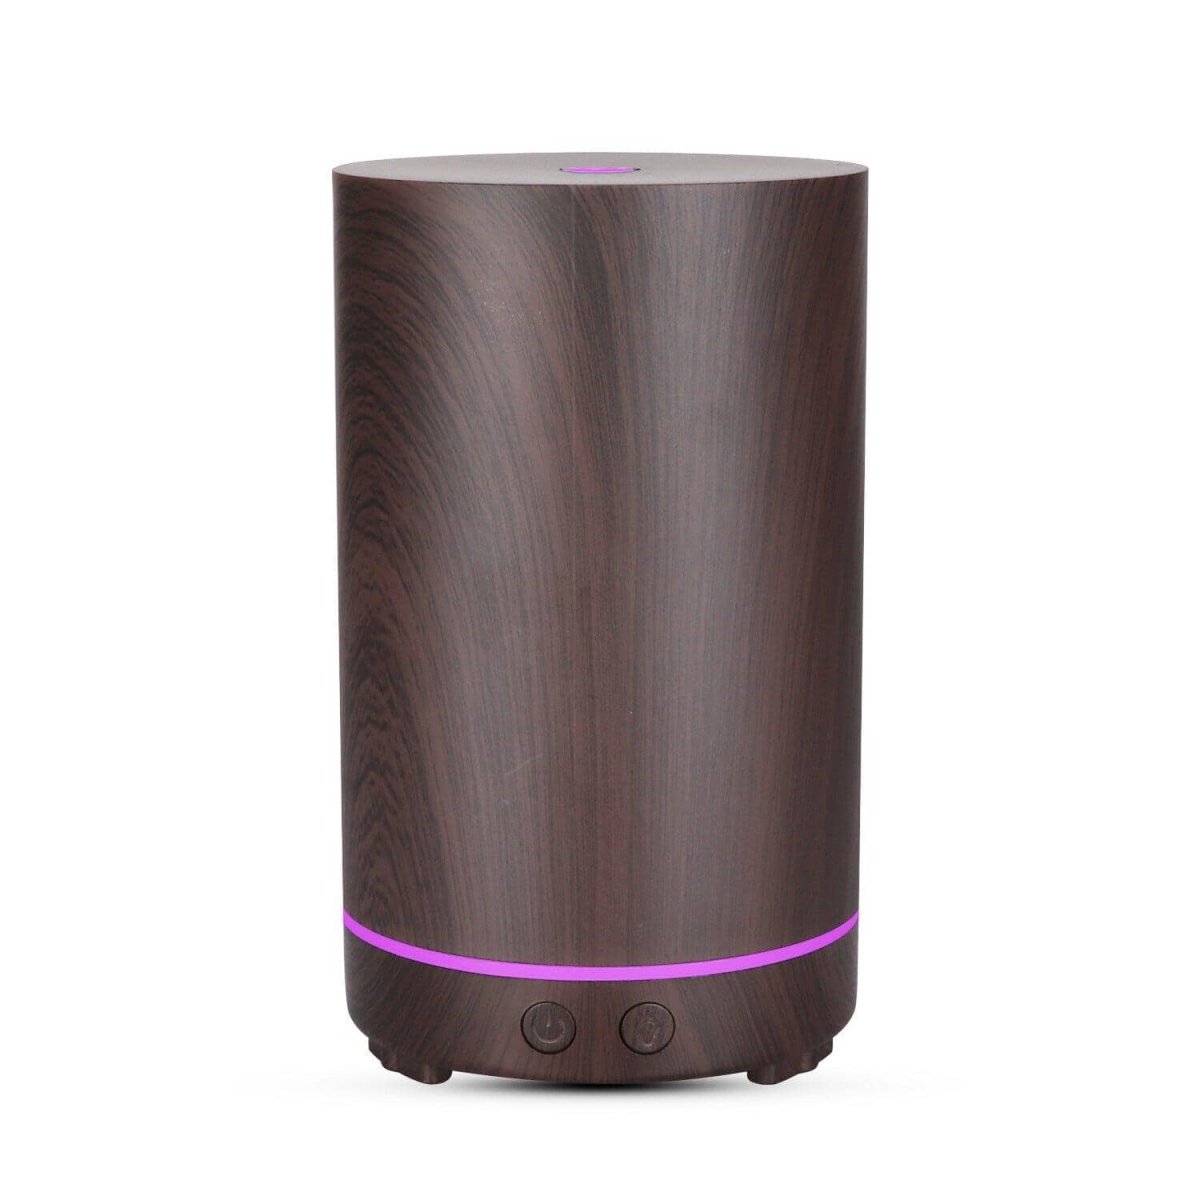 A darck chocolate eco-friendly-wood humidifier on a white surface